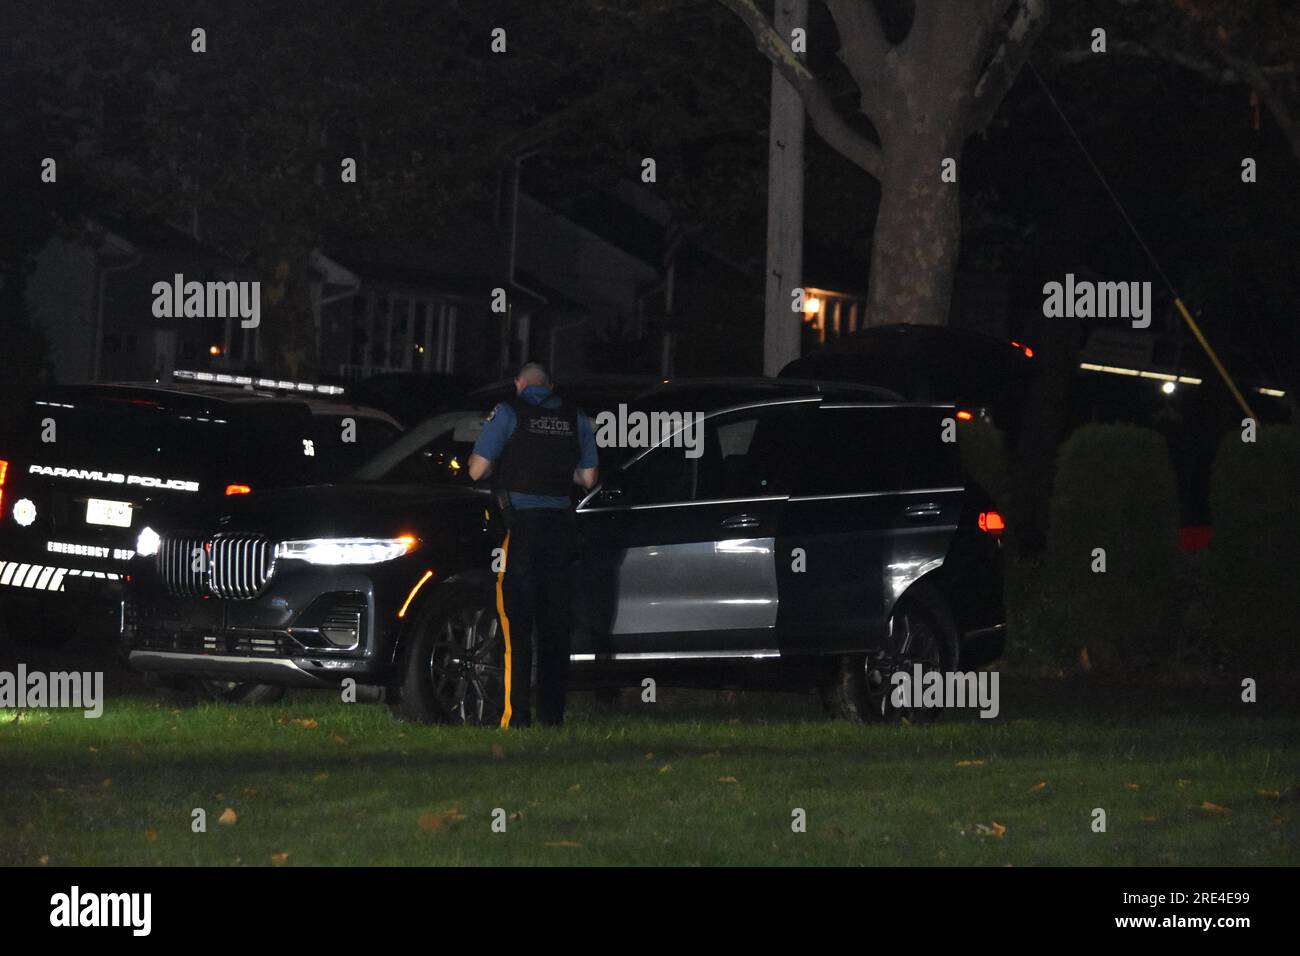 Police investigate the crime scene and prepare to tow the stolen vehicle. Car burglars were in the area of Ehret Street and Lawrence Drive in Paramus, New Jersey. Around 11:45 PM, Monday evening Paramus police were scouring the area for two males approximately 5'8, 140 lbs, dressed in all black. The car thieves crashed a stolen vehicle in the area of Ehret Street. Authorities had assistance from the K9 Unit of the Bergen County Sheriff's Office. The search continued into the morning hours on Tuesday. (Photo by Kyle Mazza / SOPA Images/Sipa USA) Stock Photo